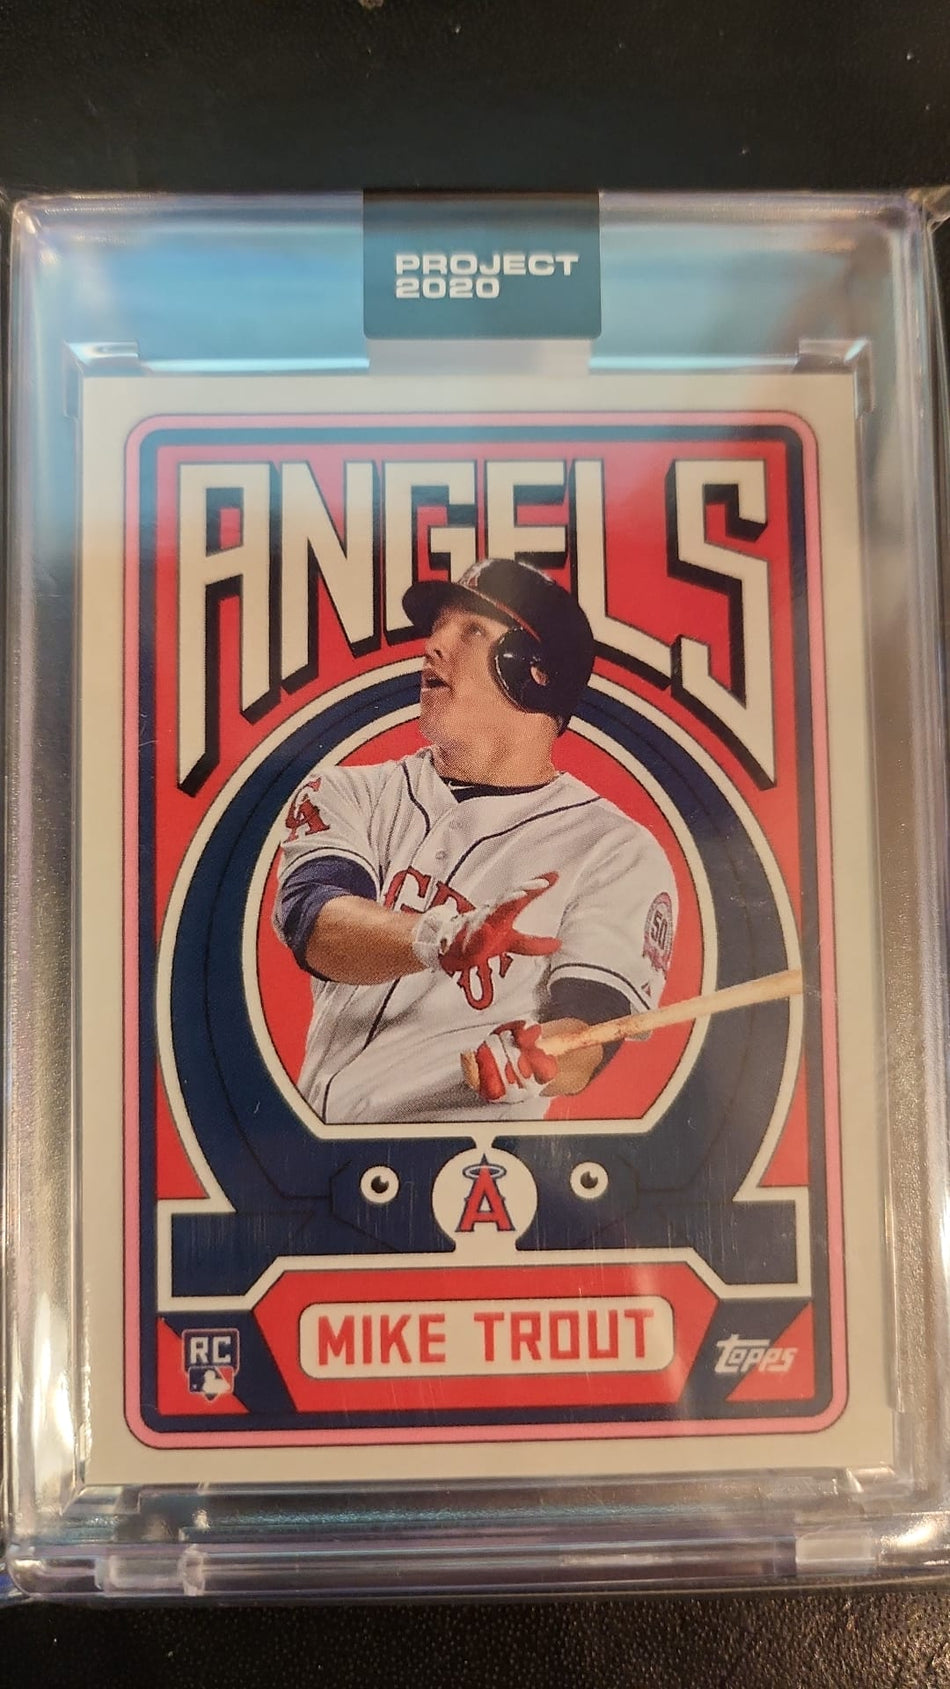 2020 Mike Trout Project 2020 No. 187 - Topps Update